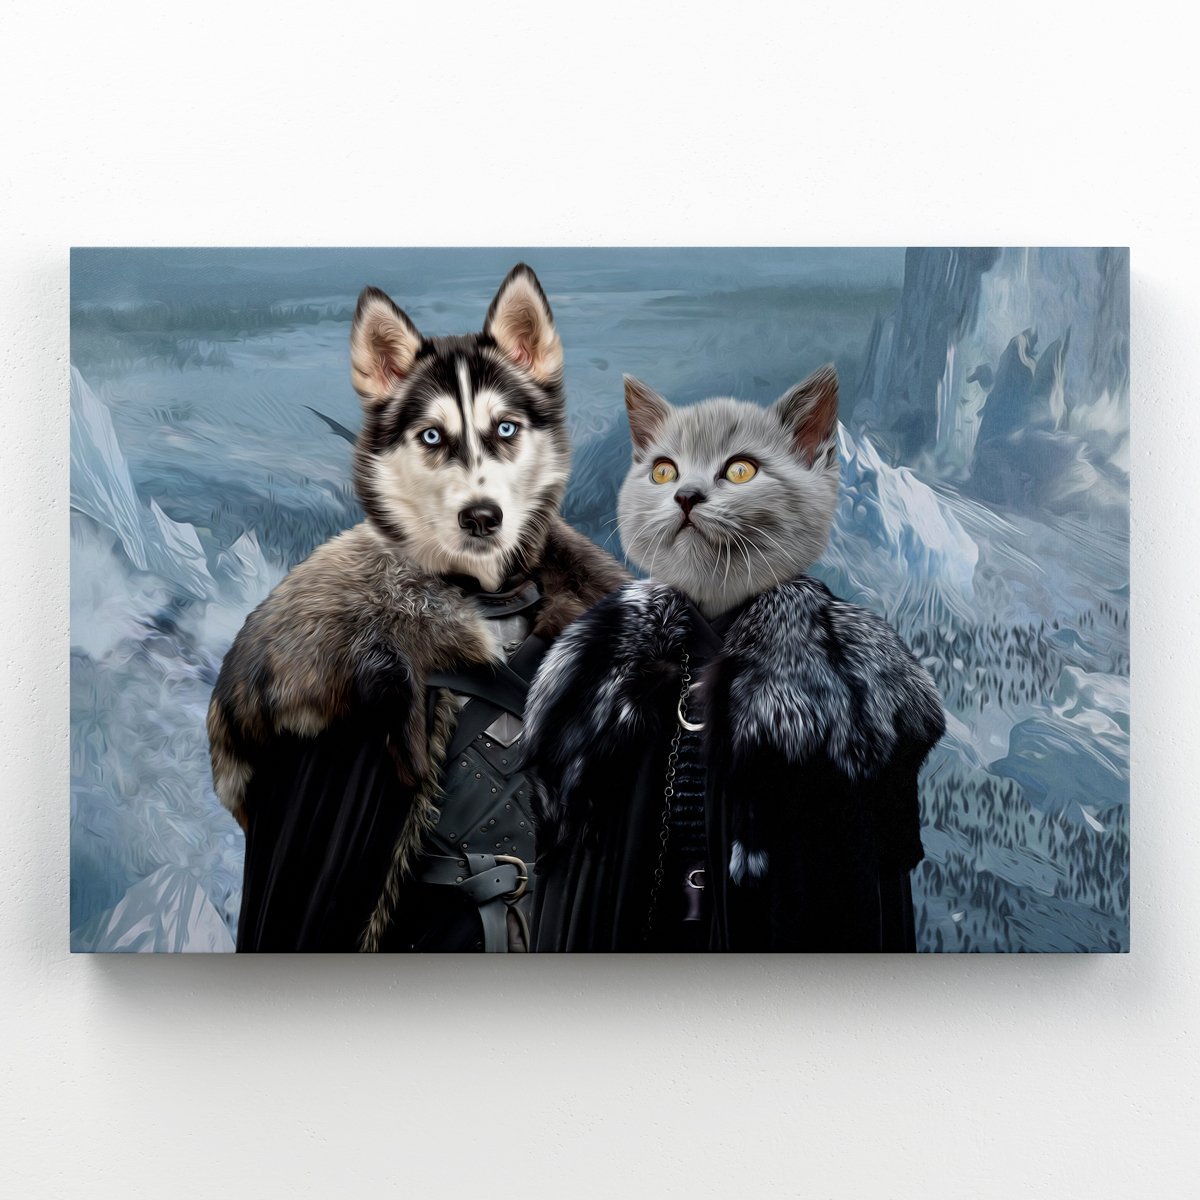 The Rulers (GOT Inspired): Custom Pet Canvas - Paw & Glory - #pet portraits# - #dog portraits# - #pet portraits uk#paw and glory, pet portraits canvas,pet photo to canvas, dog portraits canvas, pet canvas portrait, pet canvas print, dog photo on canvas